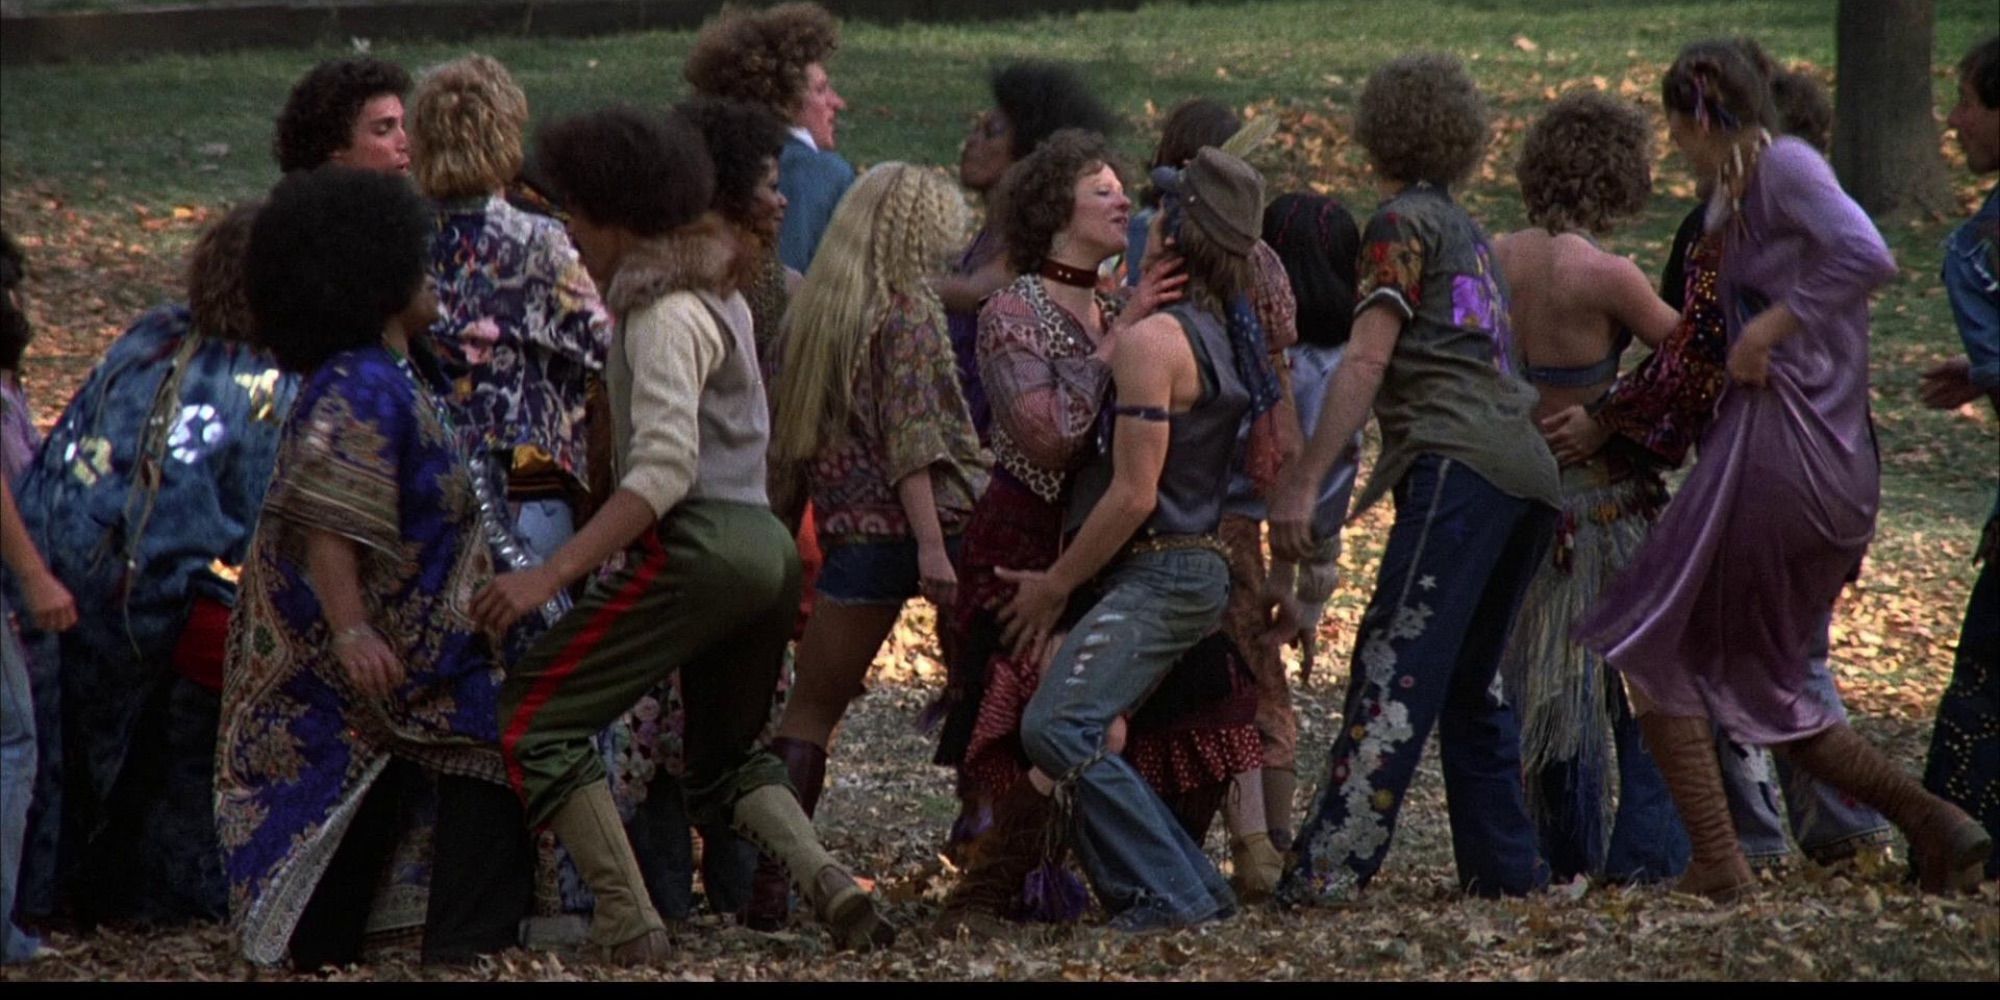 A group of people dancing on an open field in the film Hair.